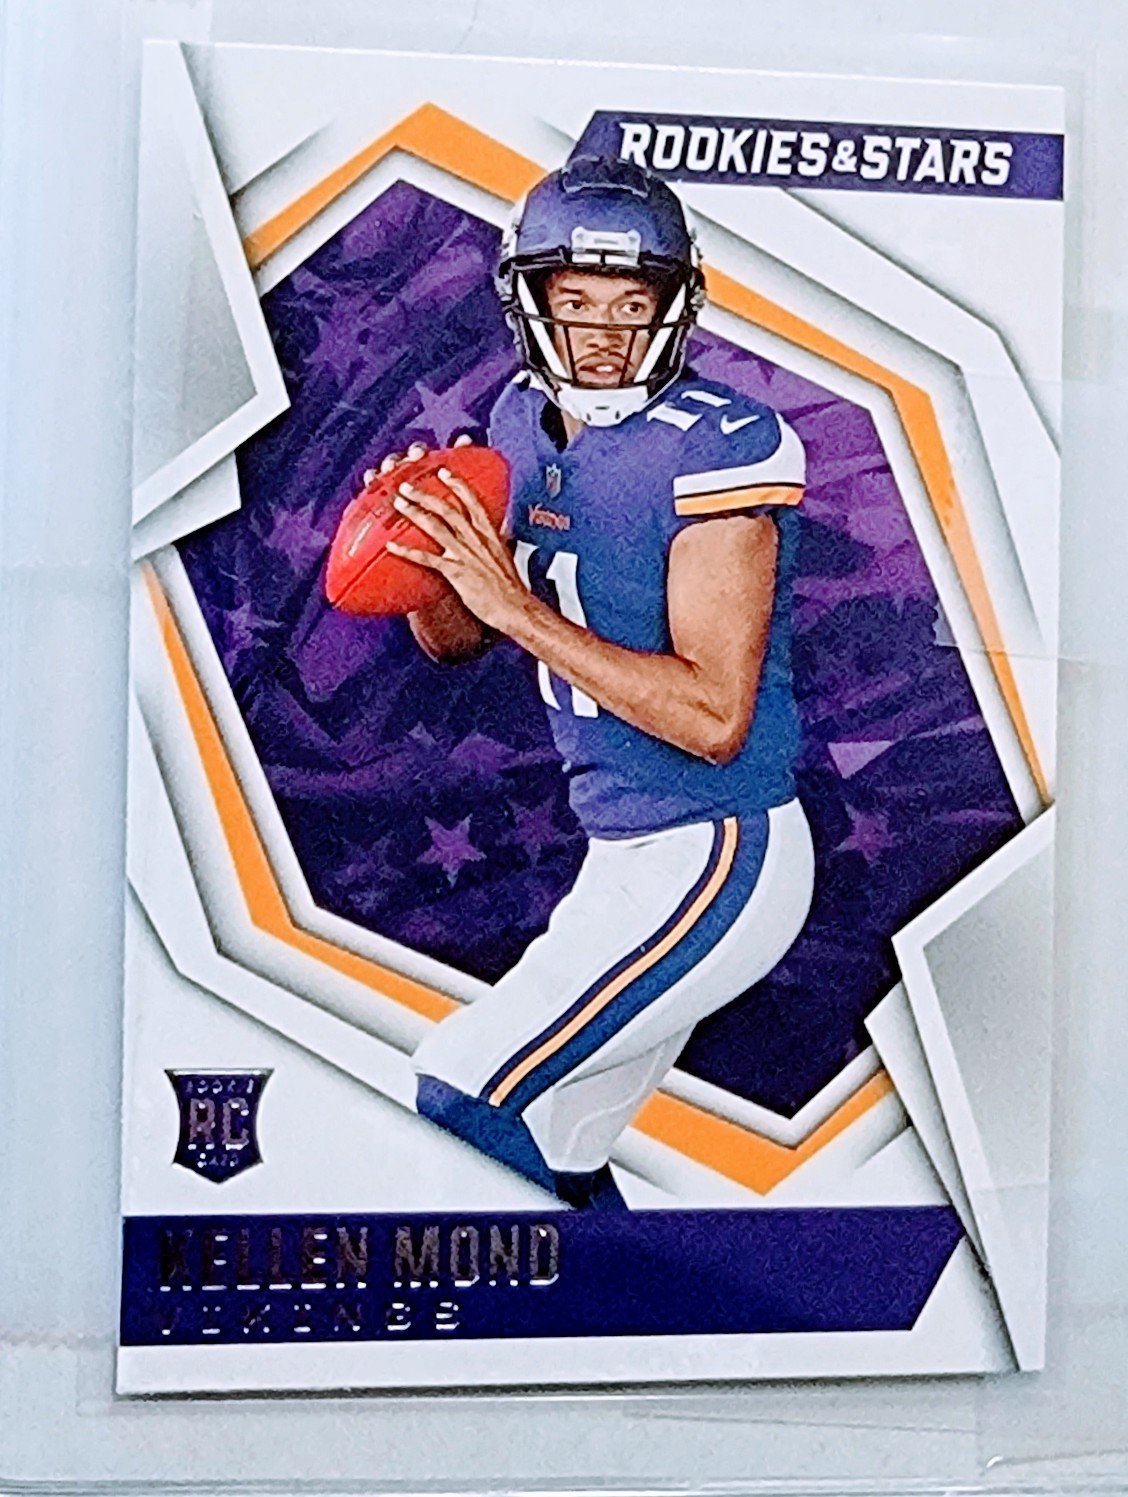 2021 Panini Rookies and Stars Kellen Mond Rookie Football Card AVM1 simple Xclusive Collectibles   